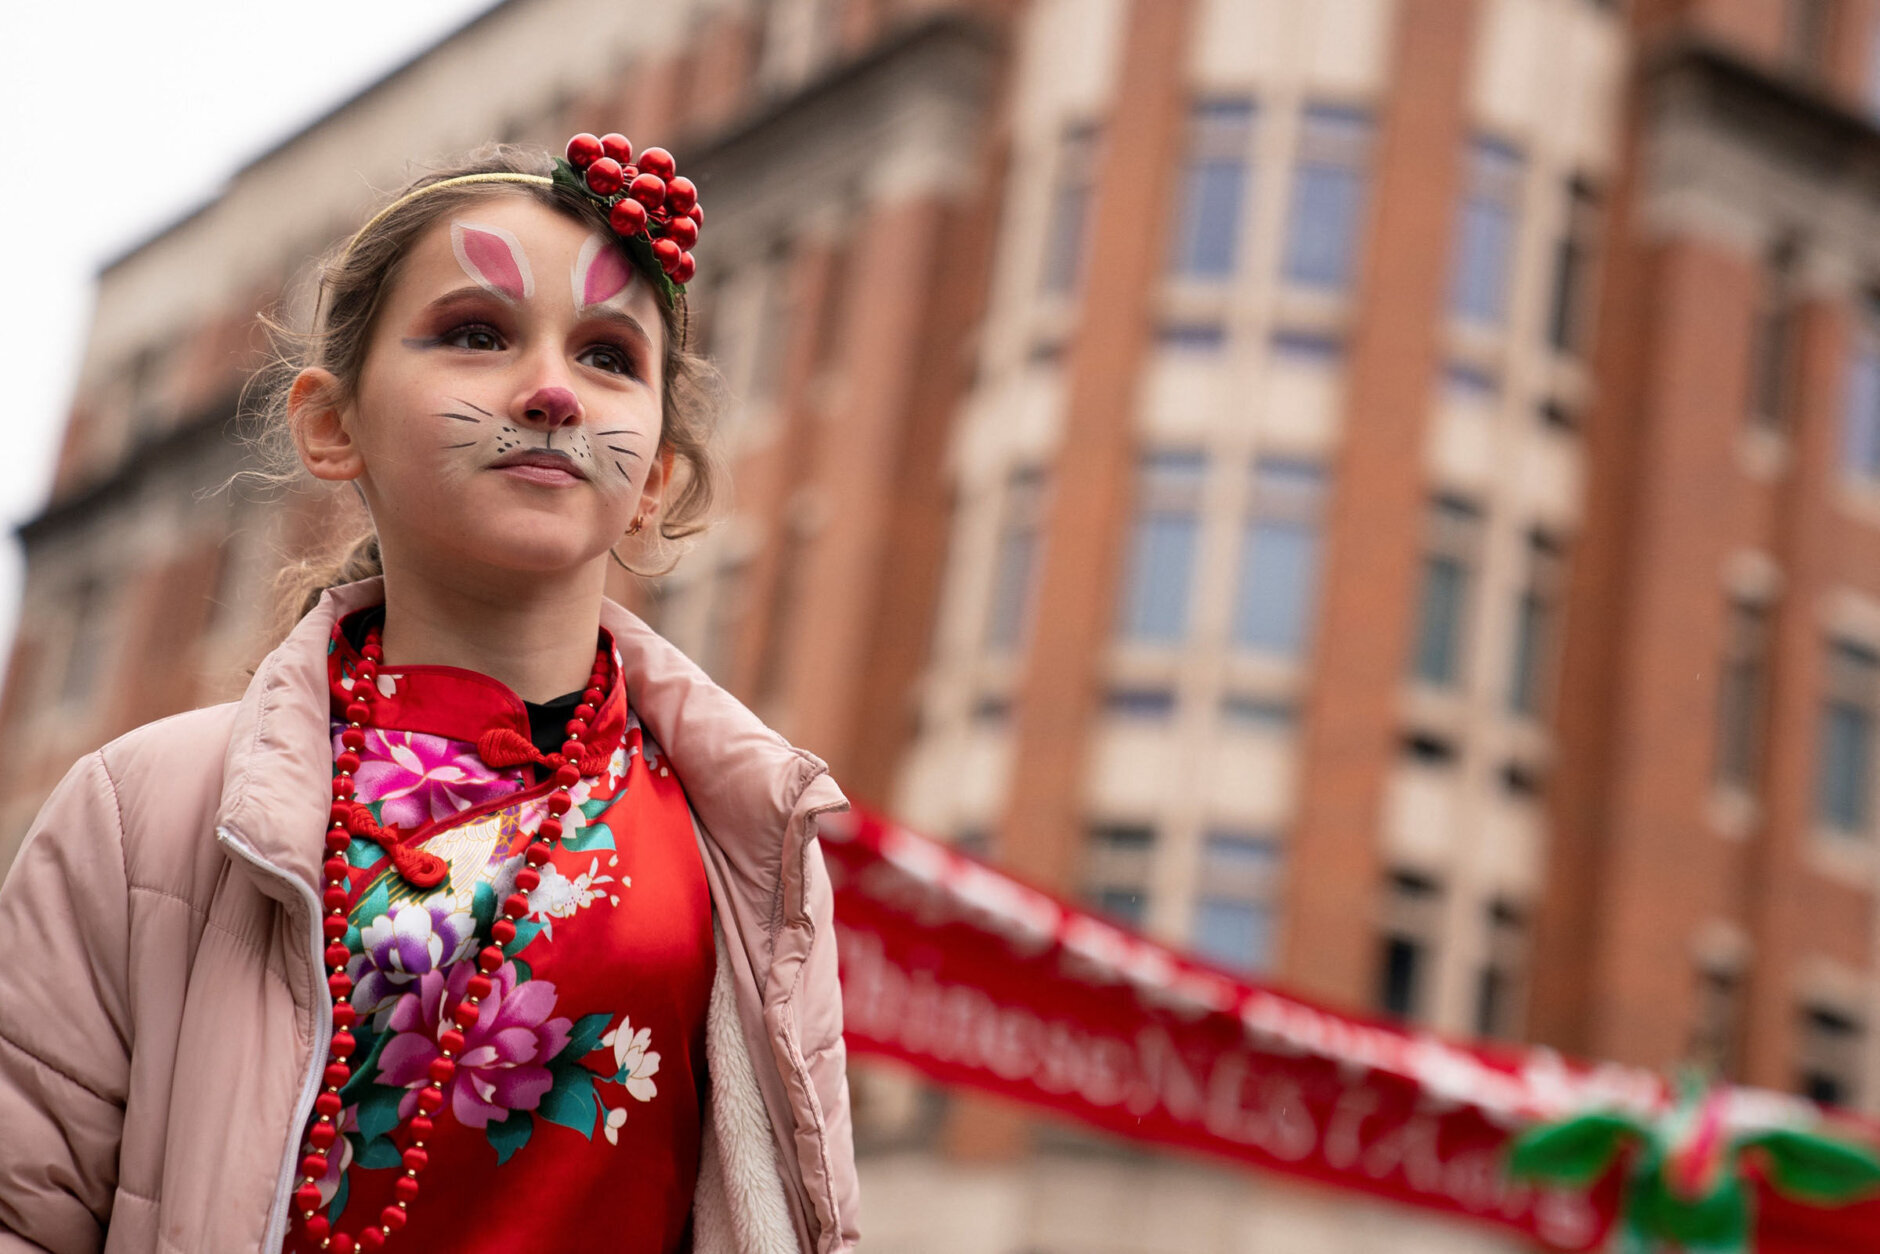 A child marches in the Lunar New Year Parade in the Chinatown neighborhood of Washington, DC, on January 22, 2023. - 2023 is the year of the rabbit in the Chinese horoscope. (Photo by Stefani Reynolds / AFP) (Photo by STEFANI REYNOLDS/AFP via Getty Images)